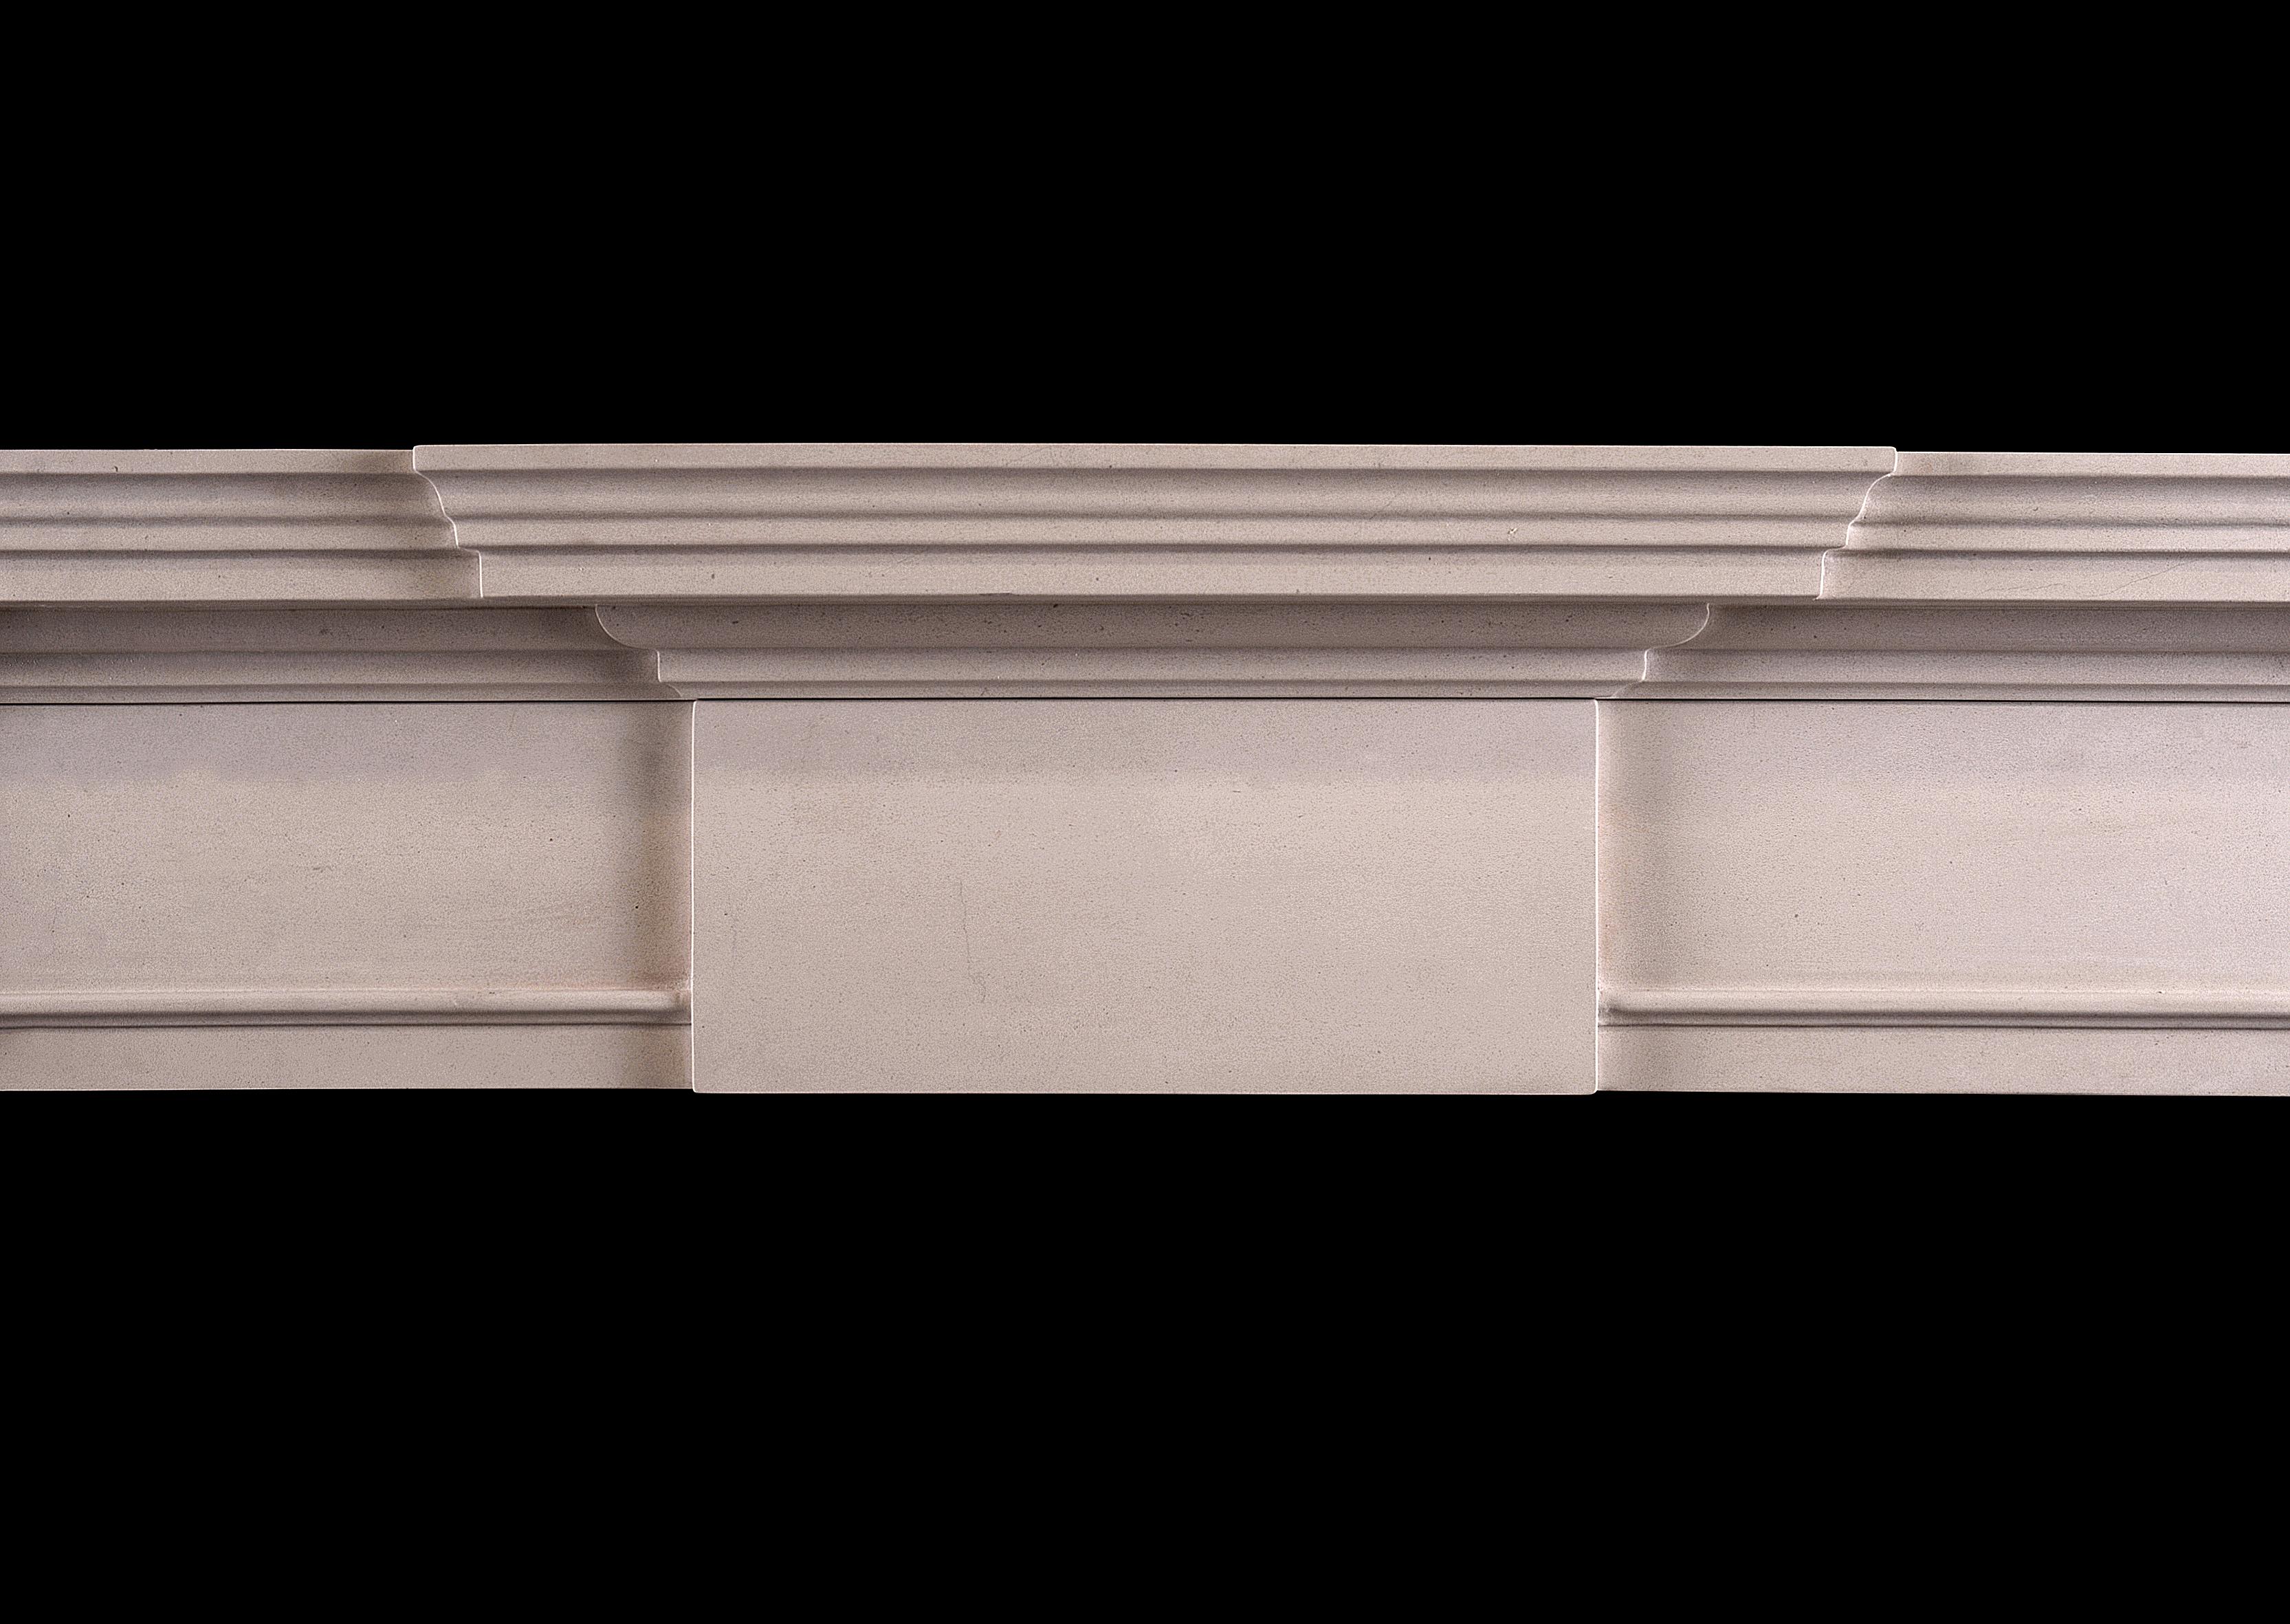 A mid-sized English Georgian style limestone fireplace. The plain jambs surmounted by scotia moulding and plain end blocks. The frieze with plain centre panel with moulded shelf above. An attractively simple model in the classical style. Modern.